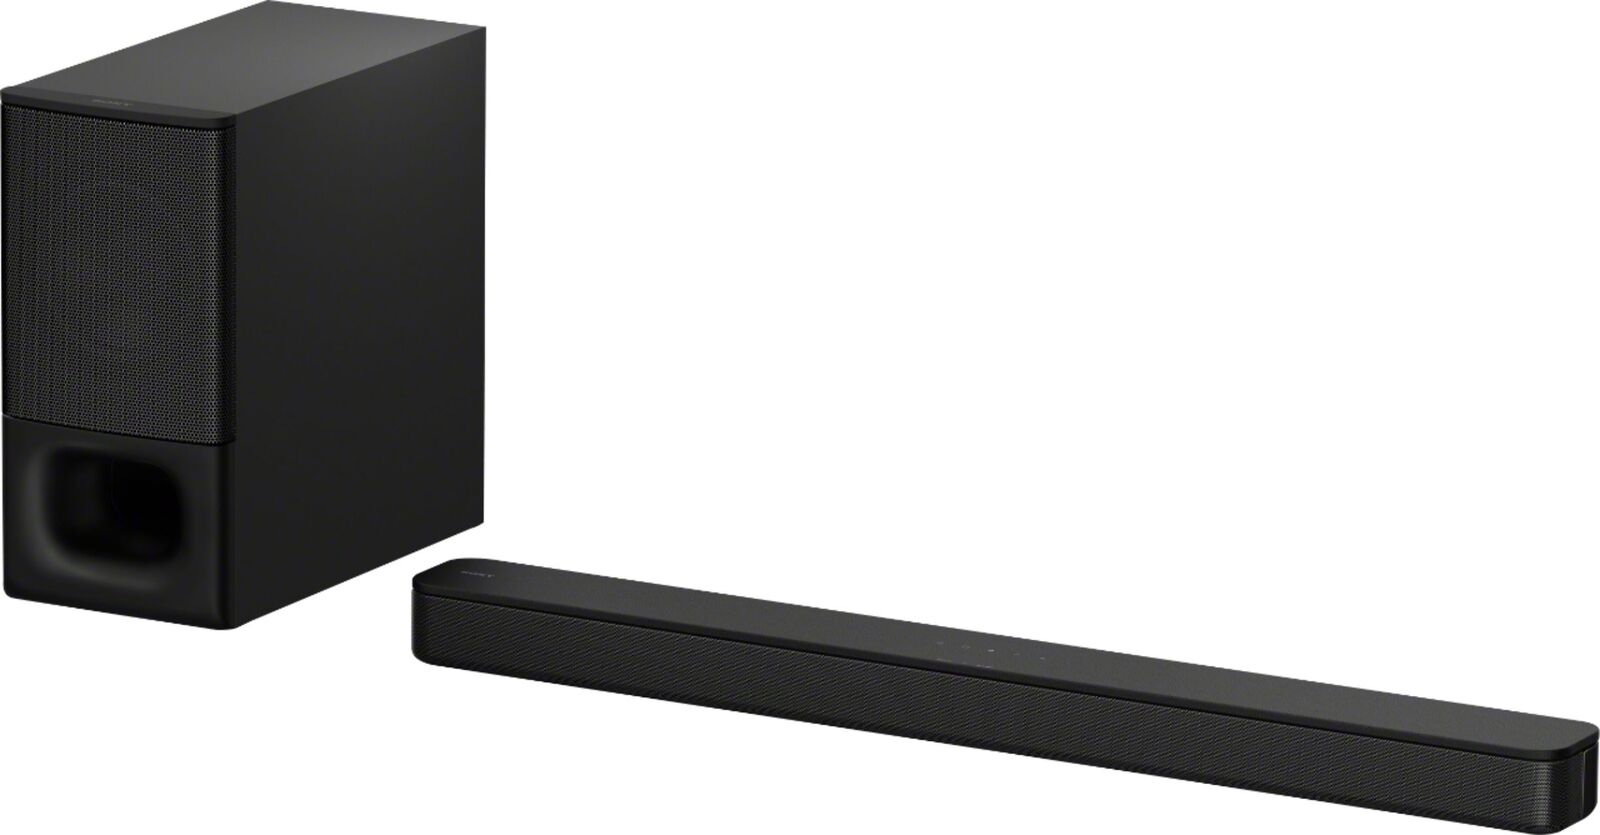 Sony HT-S350 2.1 Channel Soundbar With Wireless Subwoofer And Dolby Digital